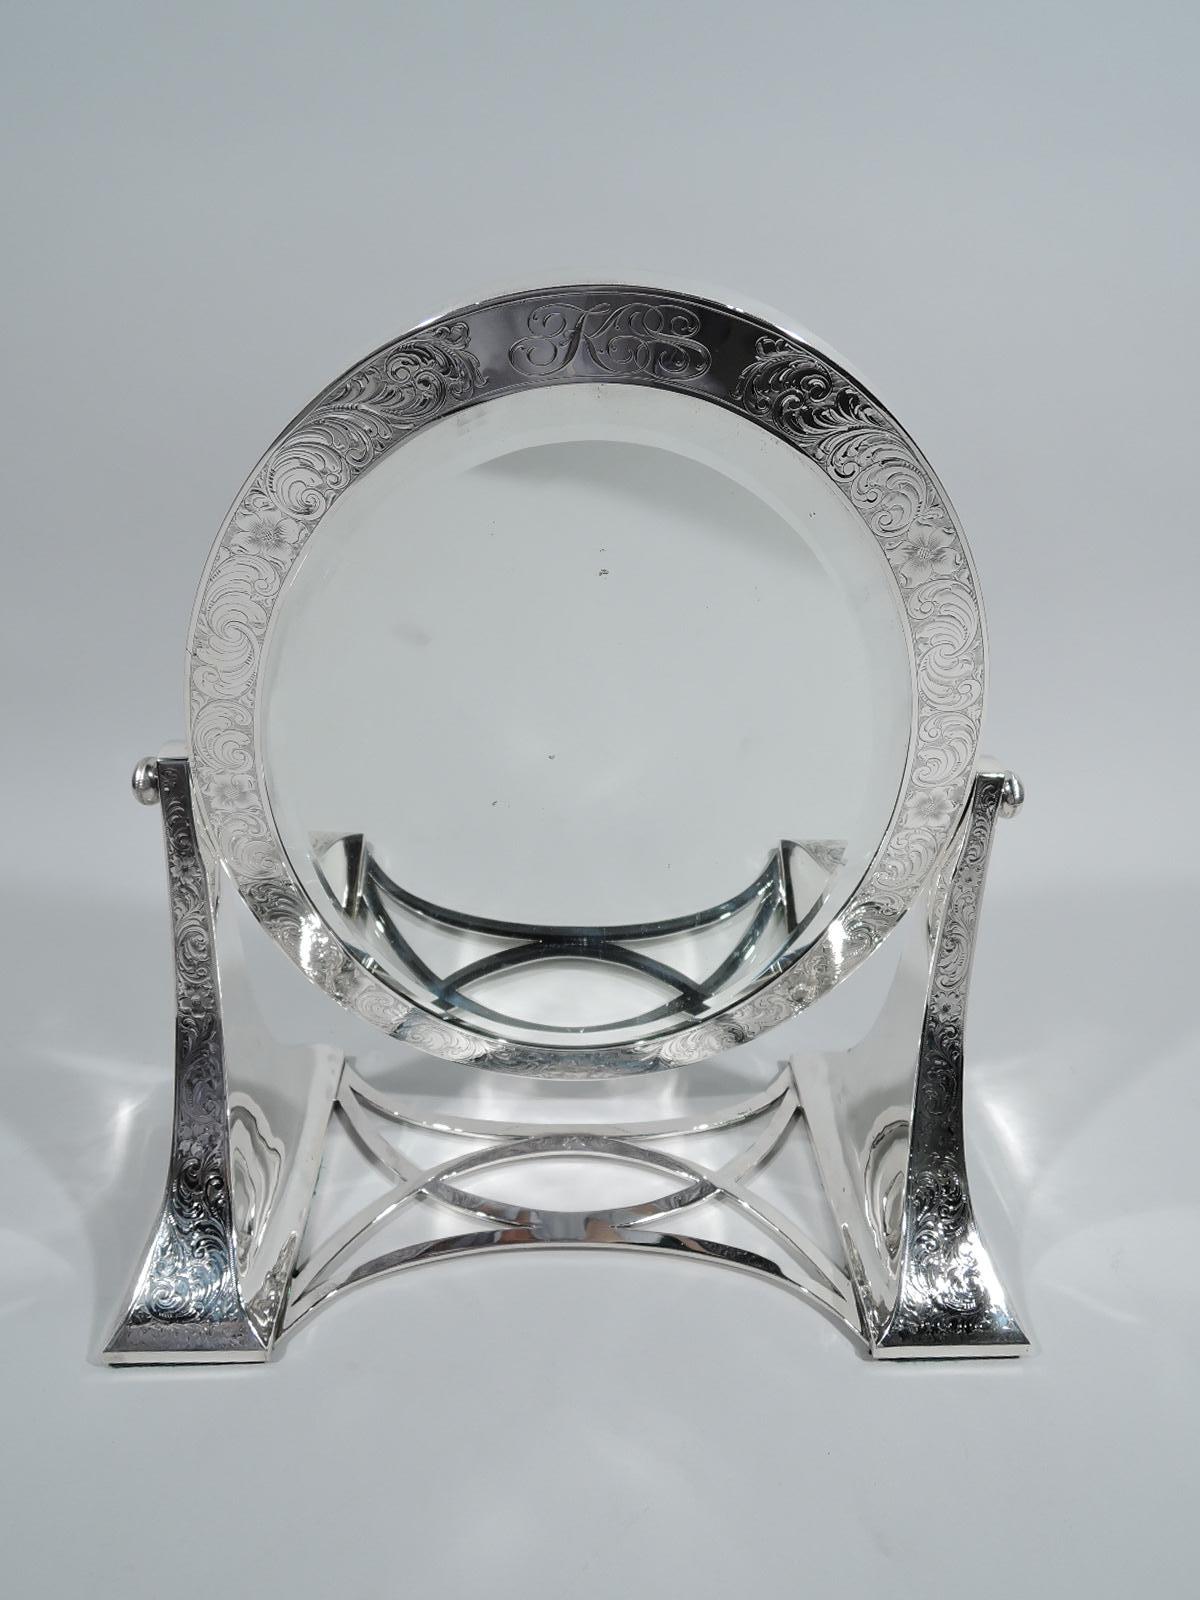 Turn-of-the-century Art Nouveau sterling silver mirror. Made by Lebkuecher in Newark. Two bracket supports joined by concave and crisscrossing stretchers. Hinged swing oval frame inset with beveled glass. Dense and fluid engraved scrolls, leaves,